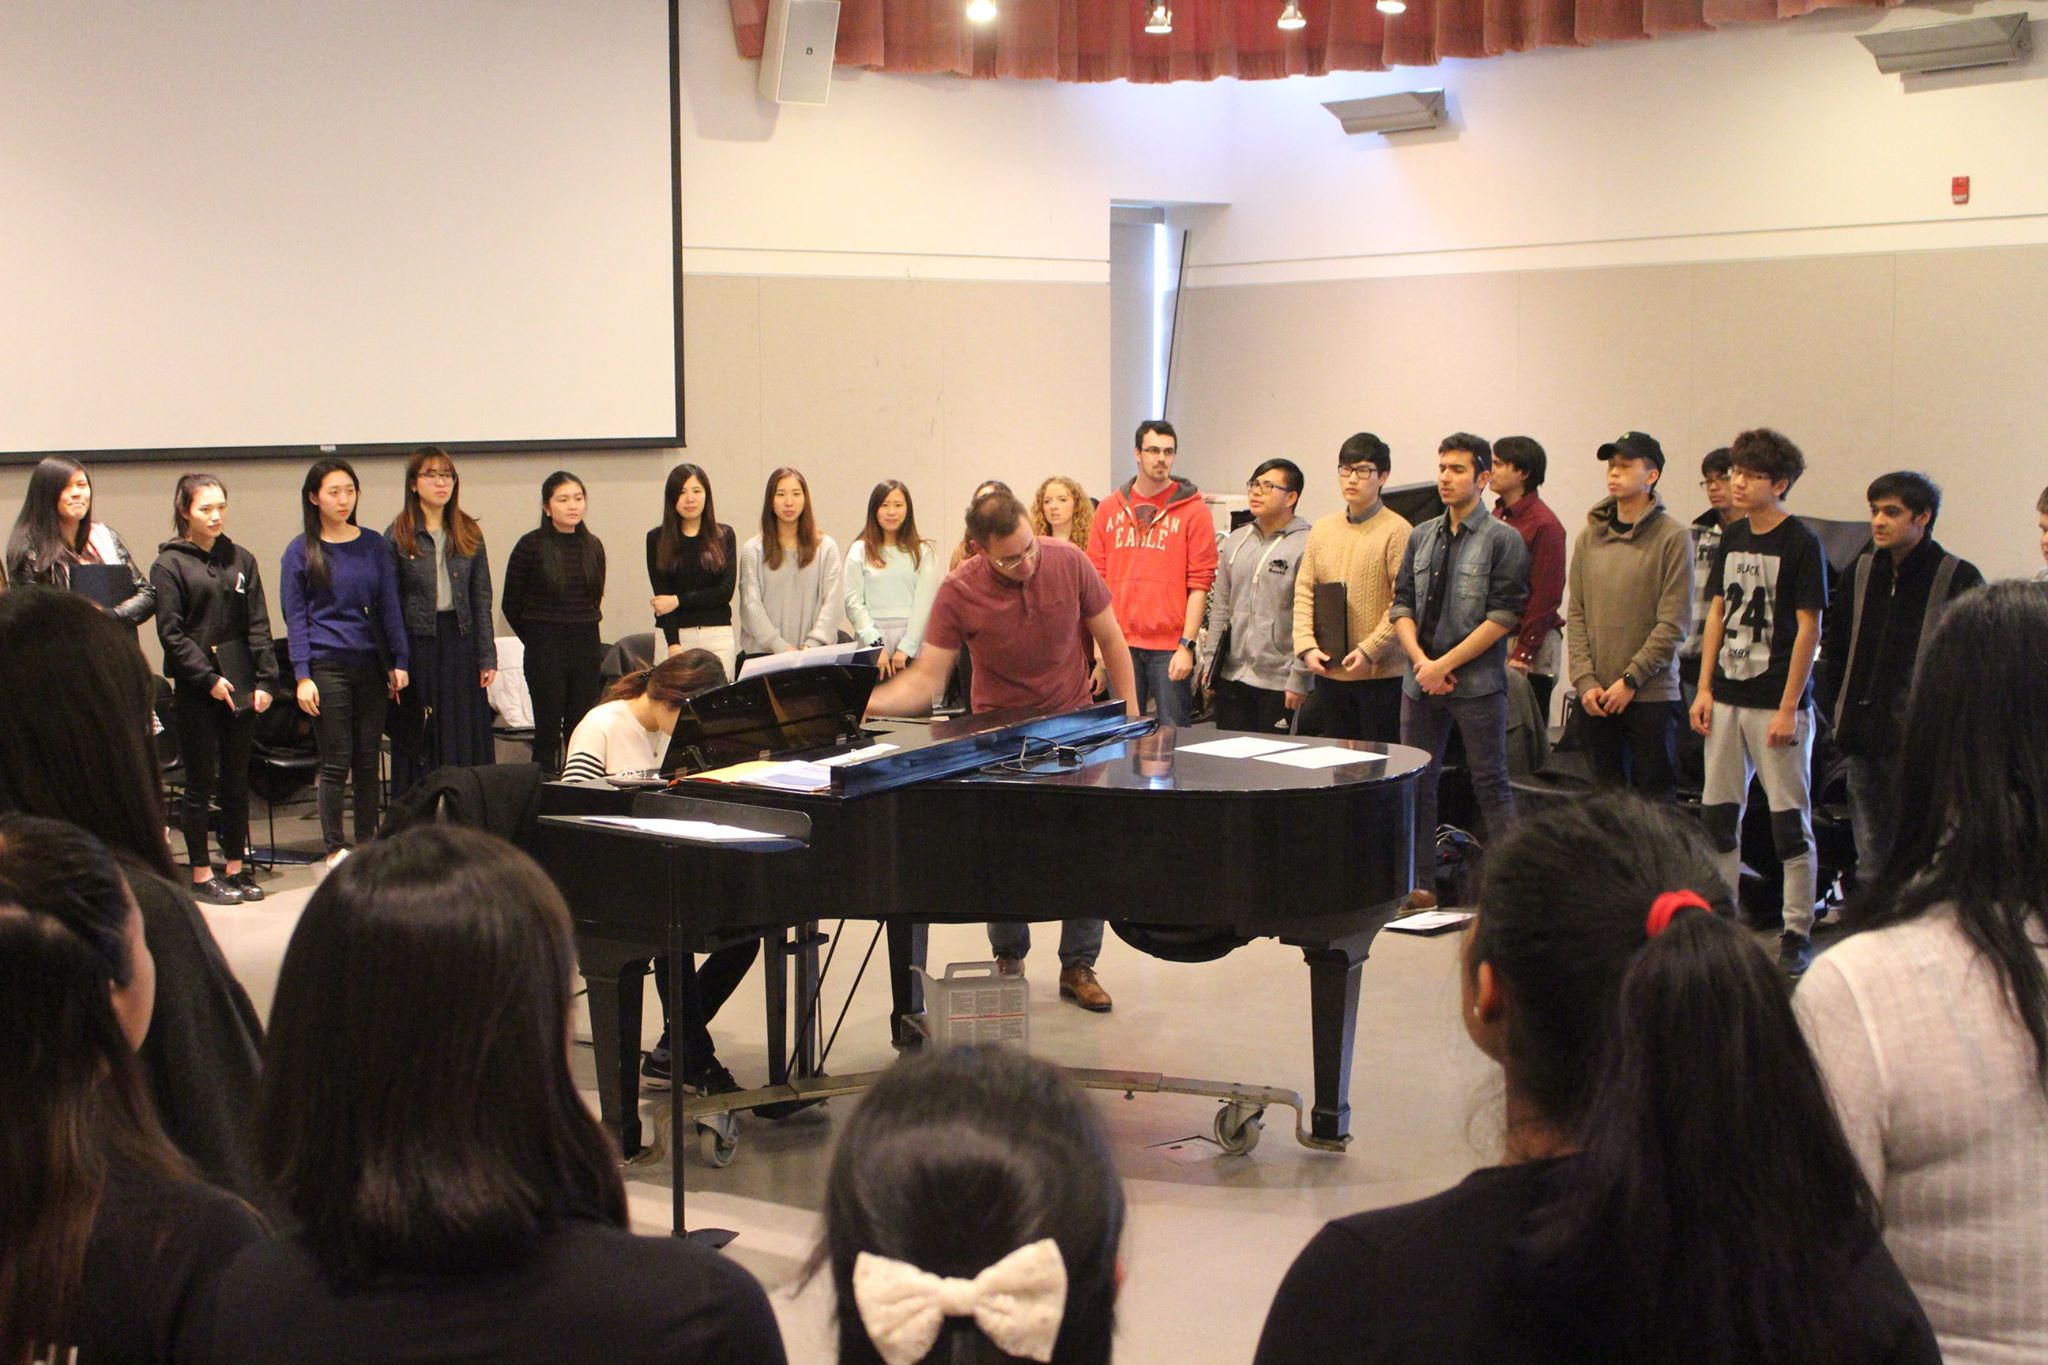 Participants are standing in a circle around a presenter and a musician playing the grand piano